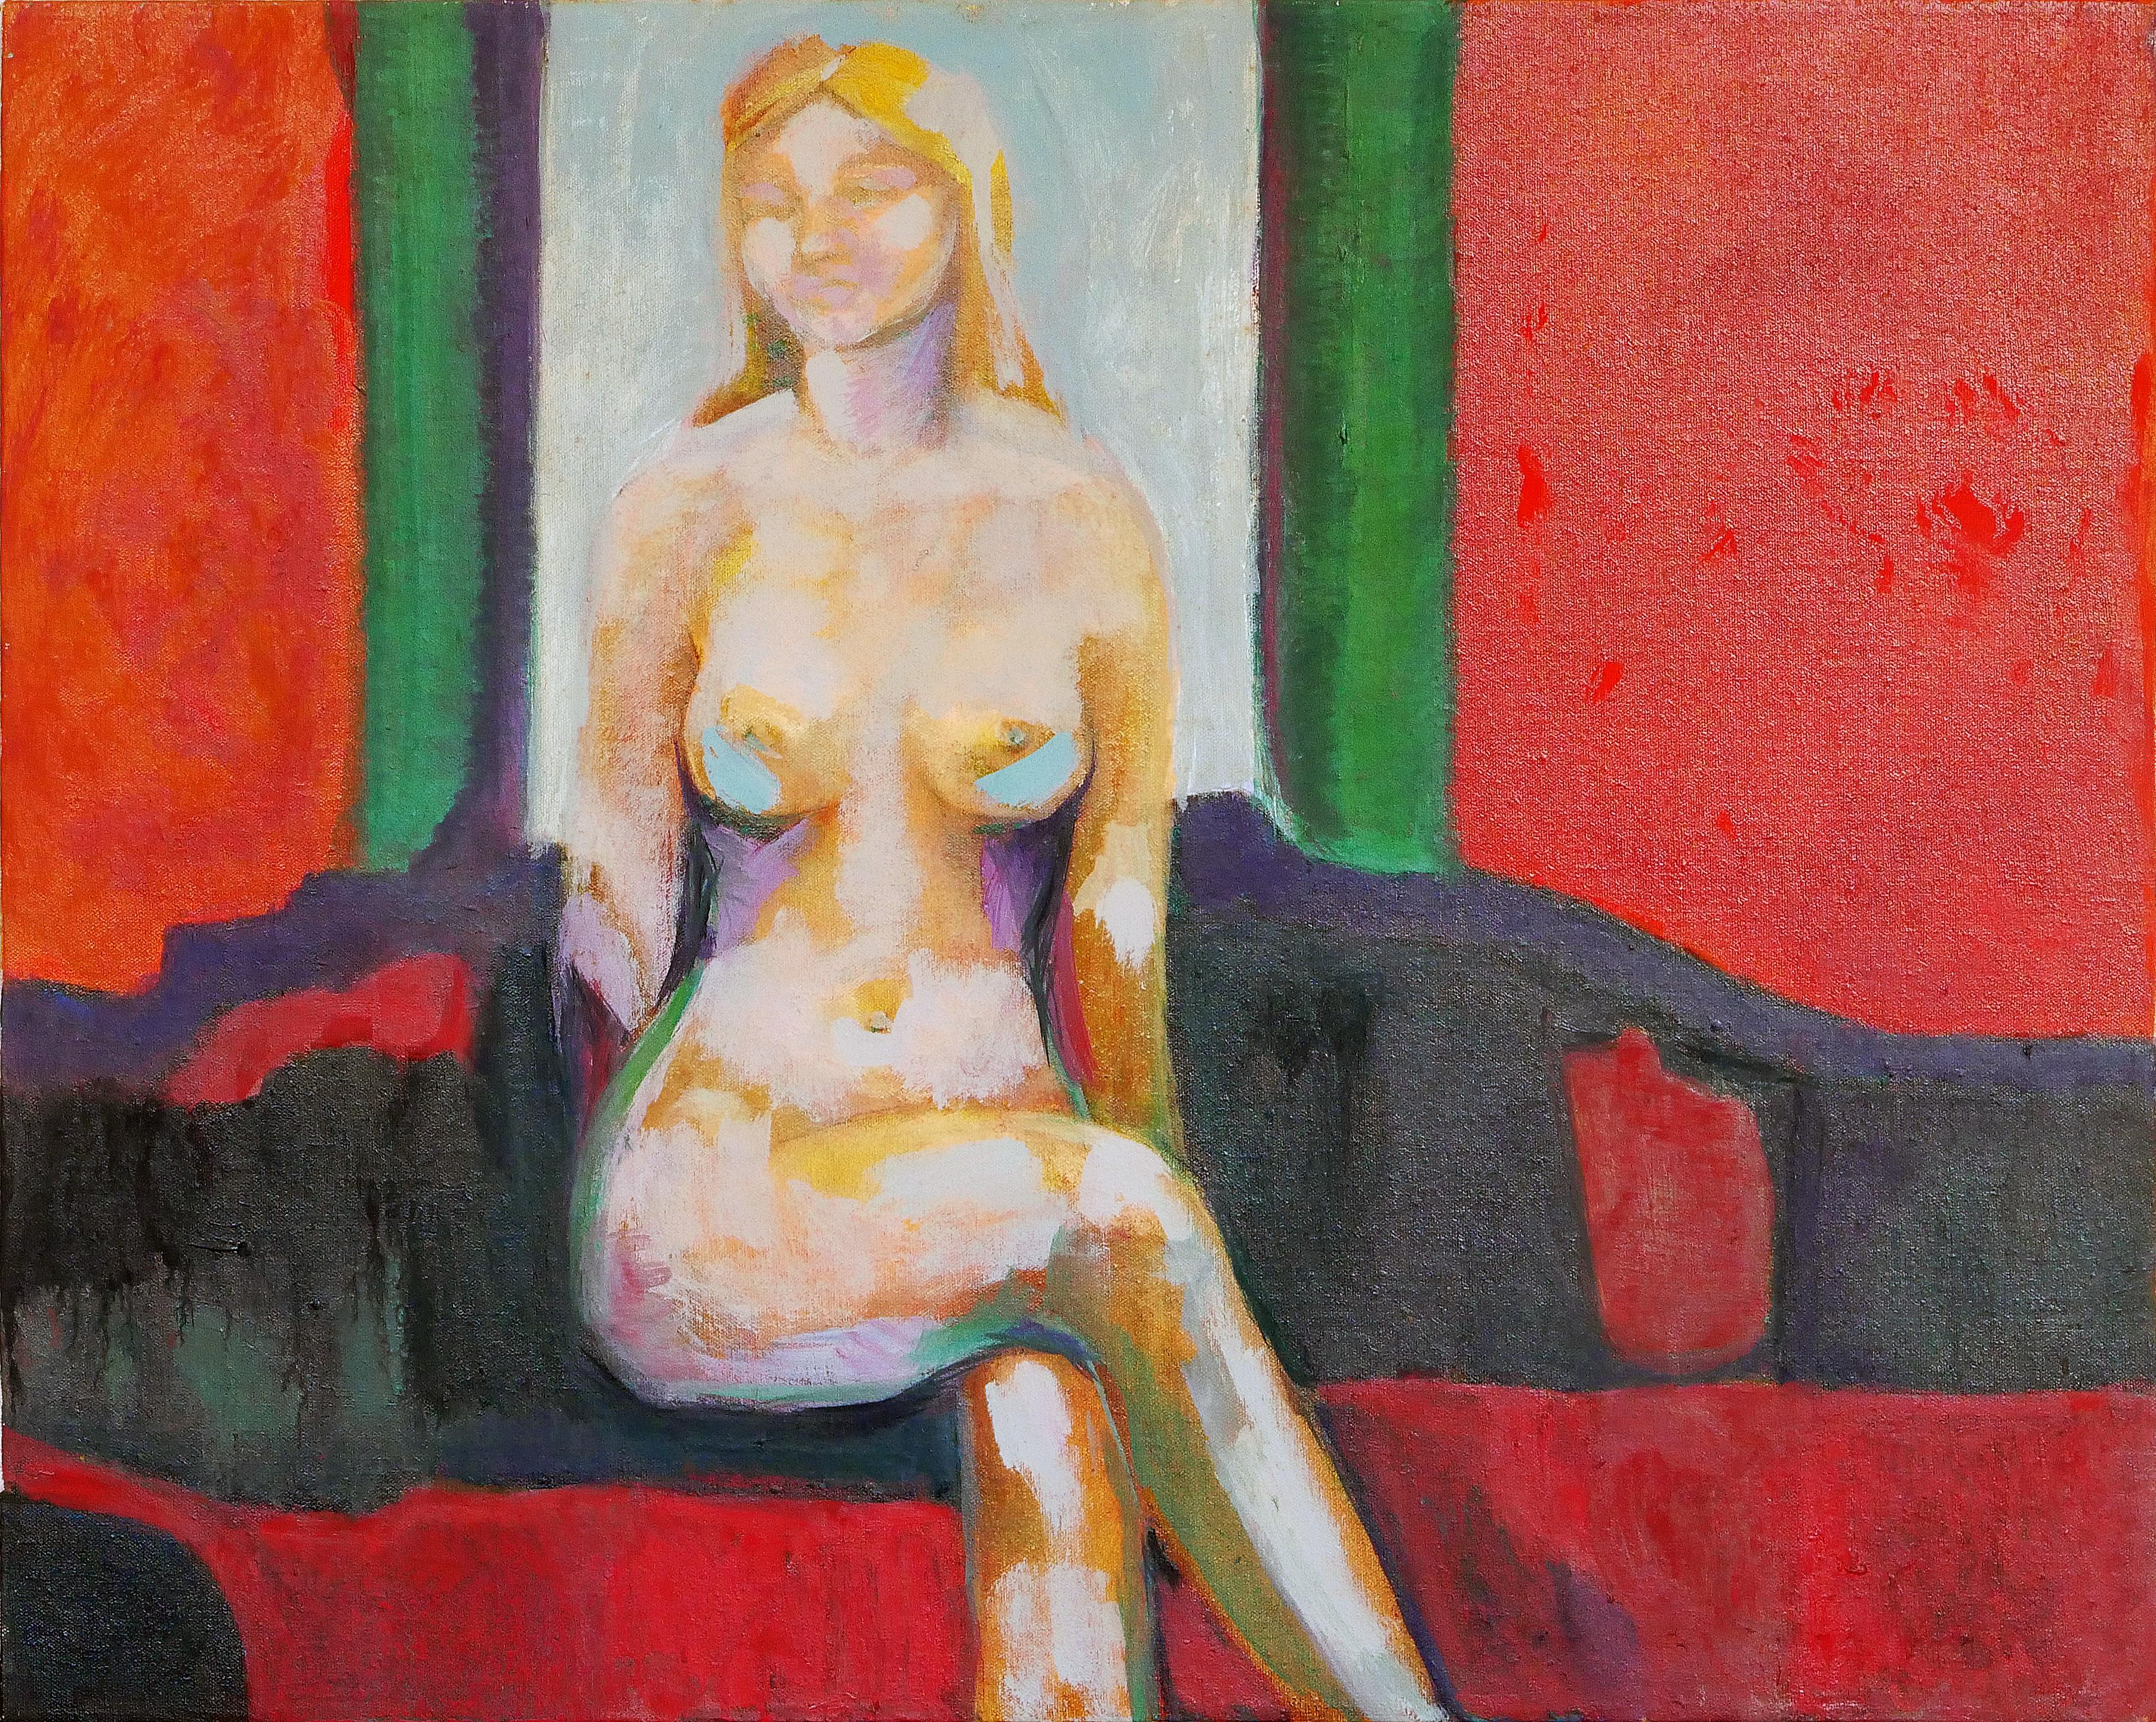 Modern Abstract Red and Green Toned Interior Painting of a Nude Female Figure